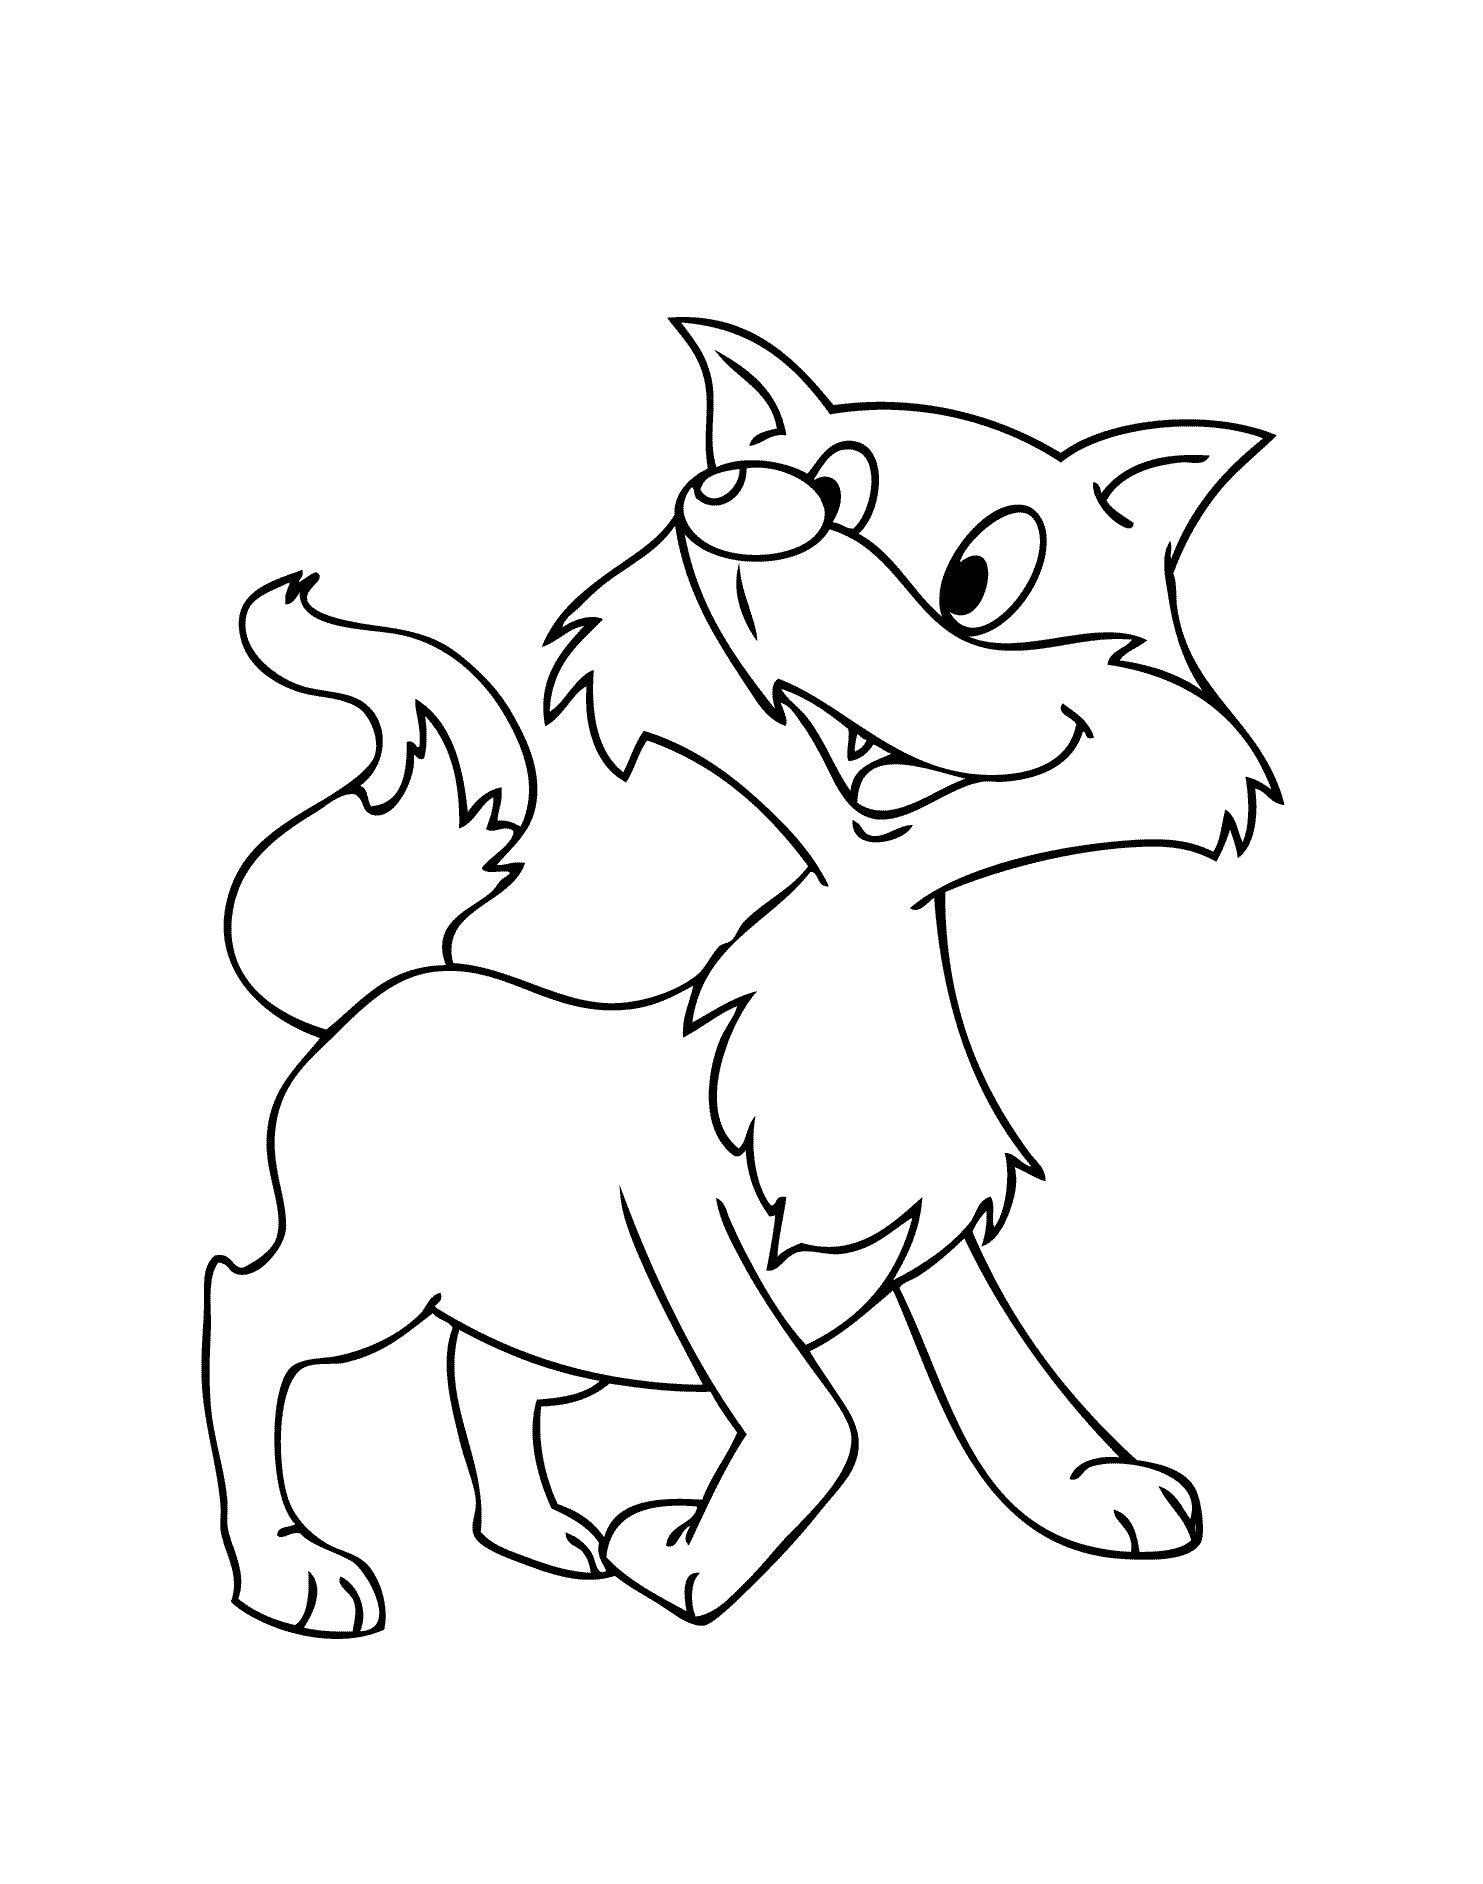 Coloring Pages For Kids Fox
 Fox Cartoon Colouring Pages Page 2 Az Coloring Sketch